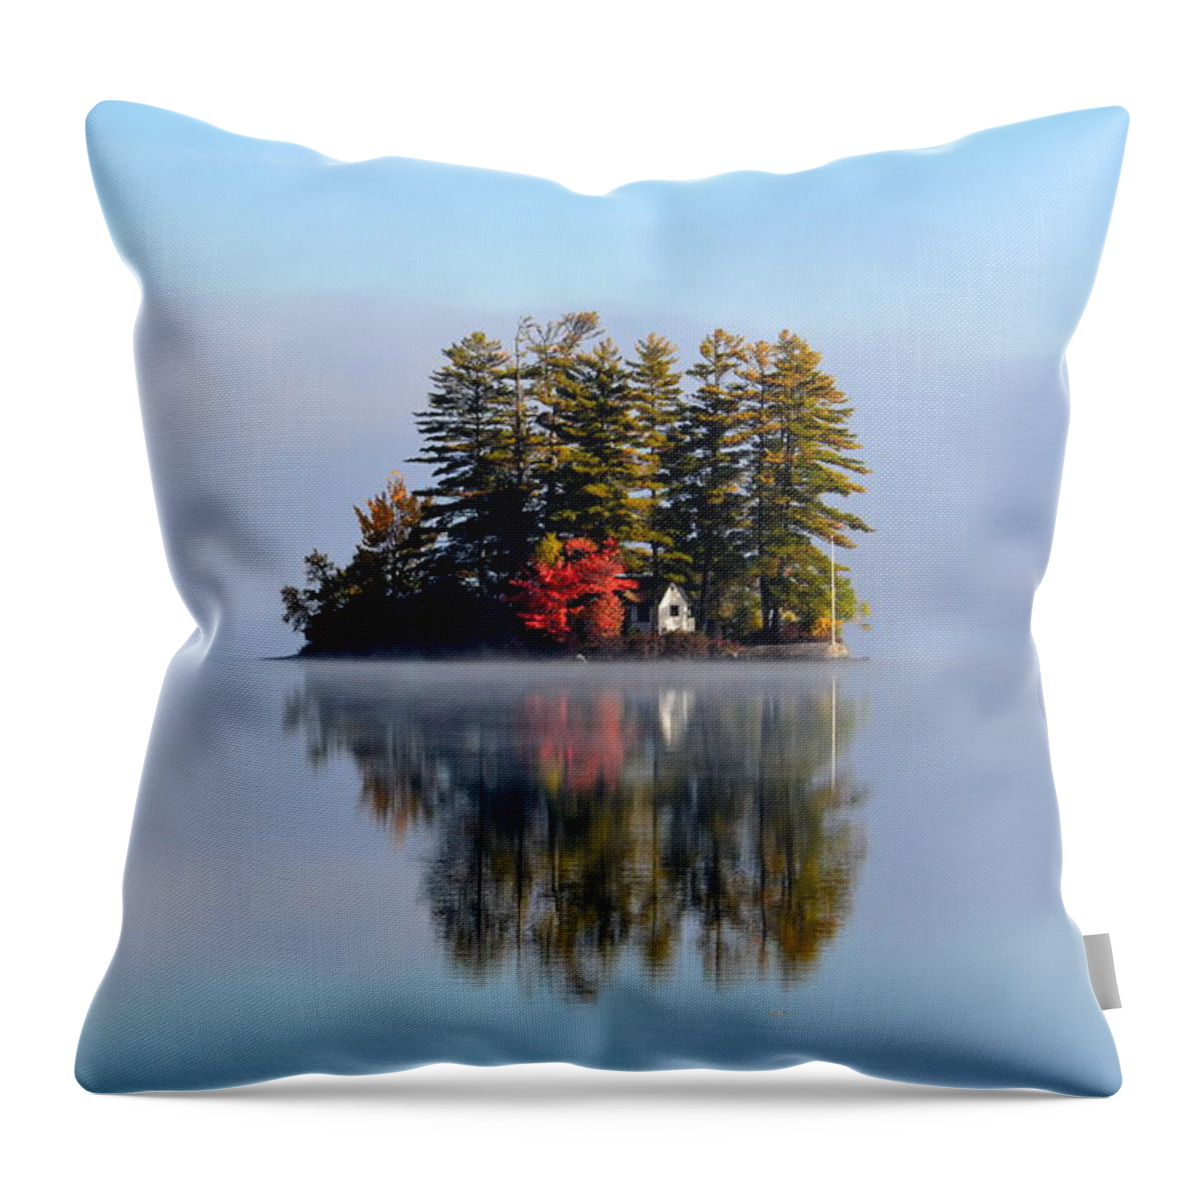 Reflection Throw Pillow featuring the photograph North Pond by Colleen Phaedra